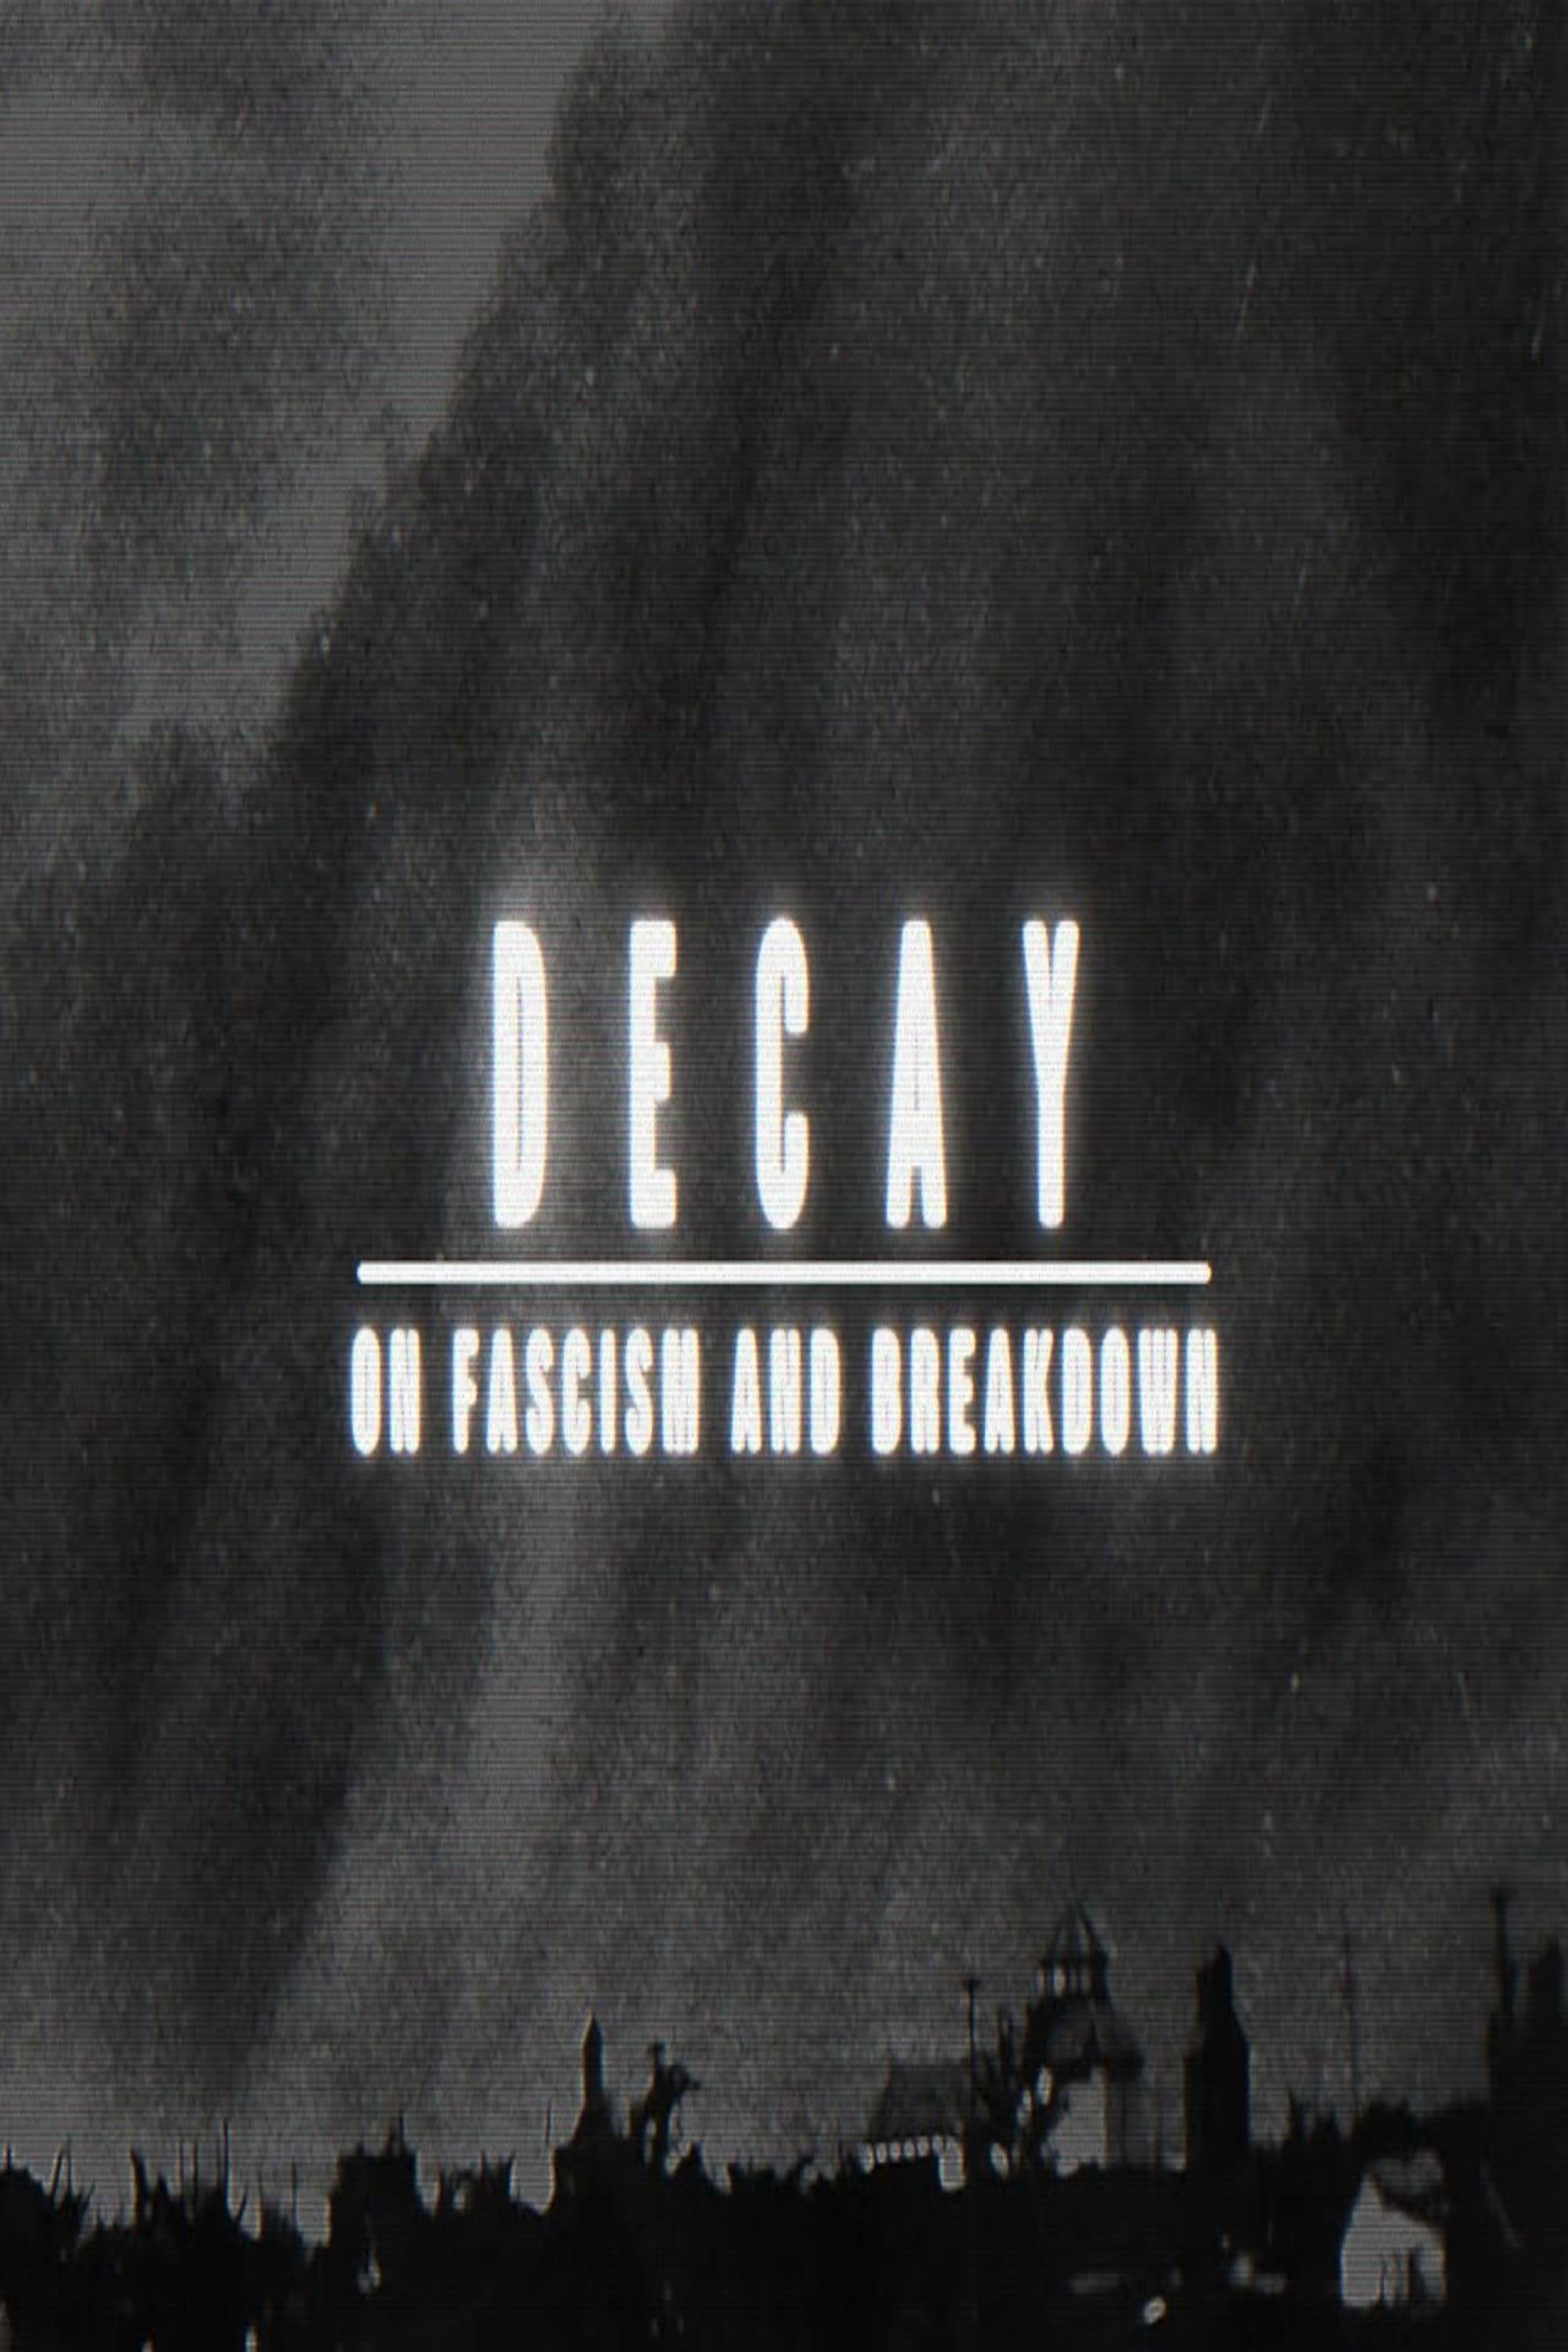 Decay: On Fascism and Breakdown poster